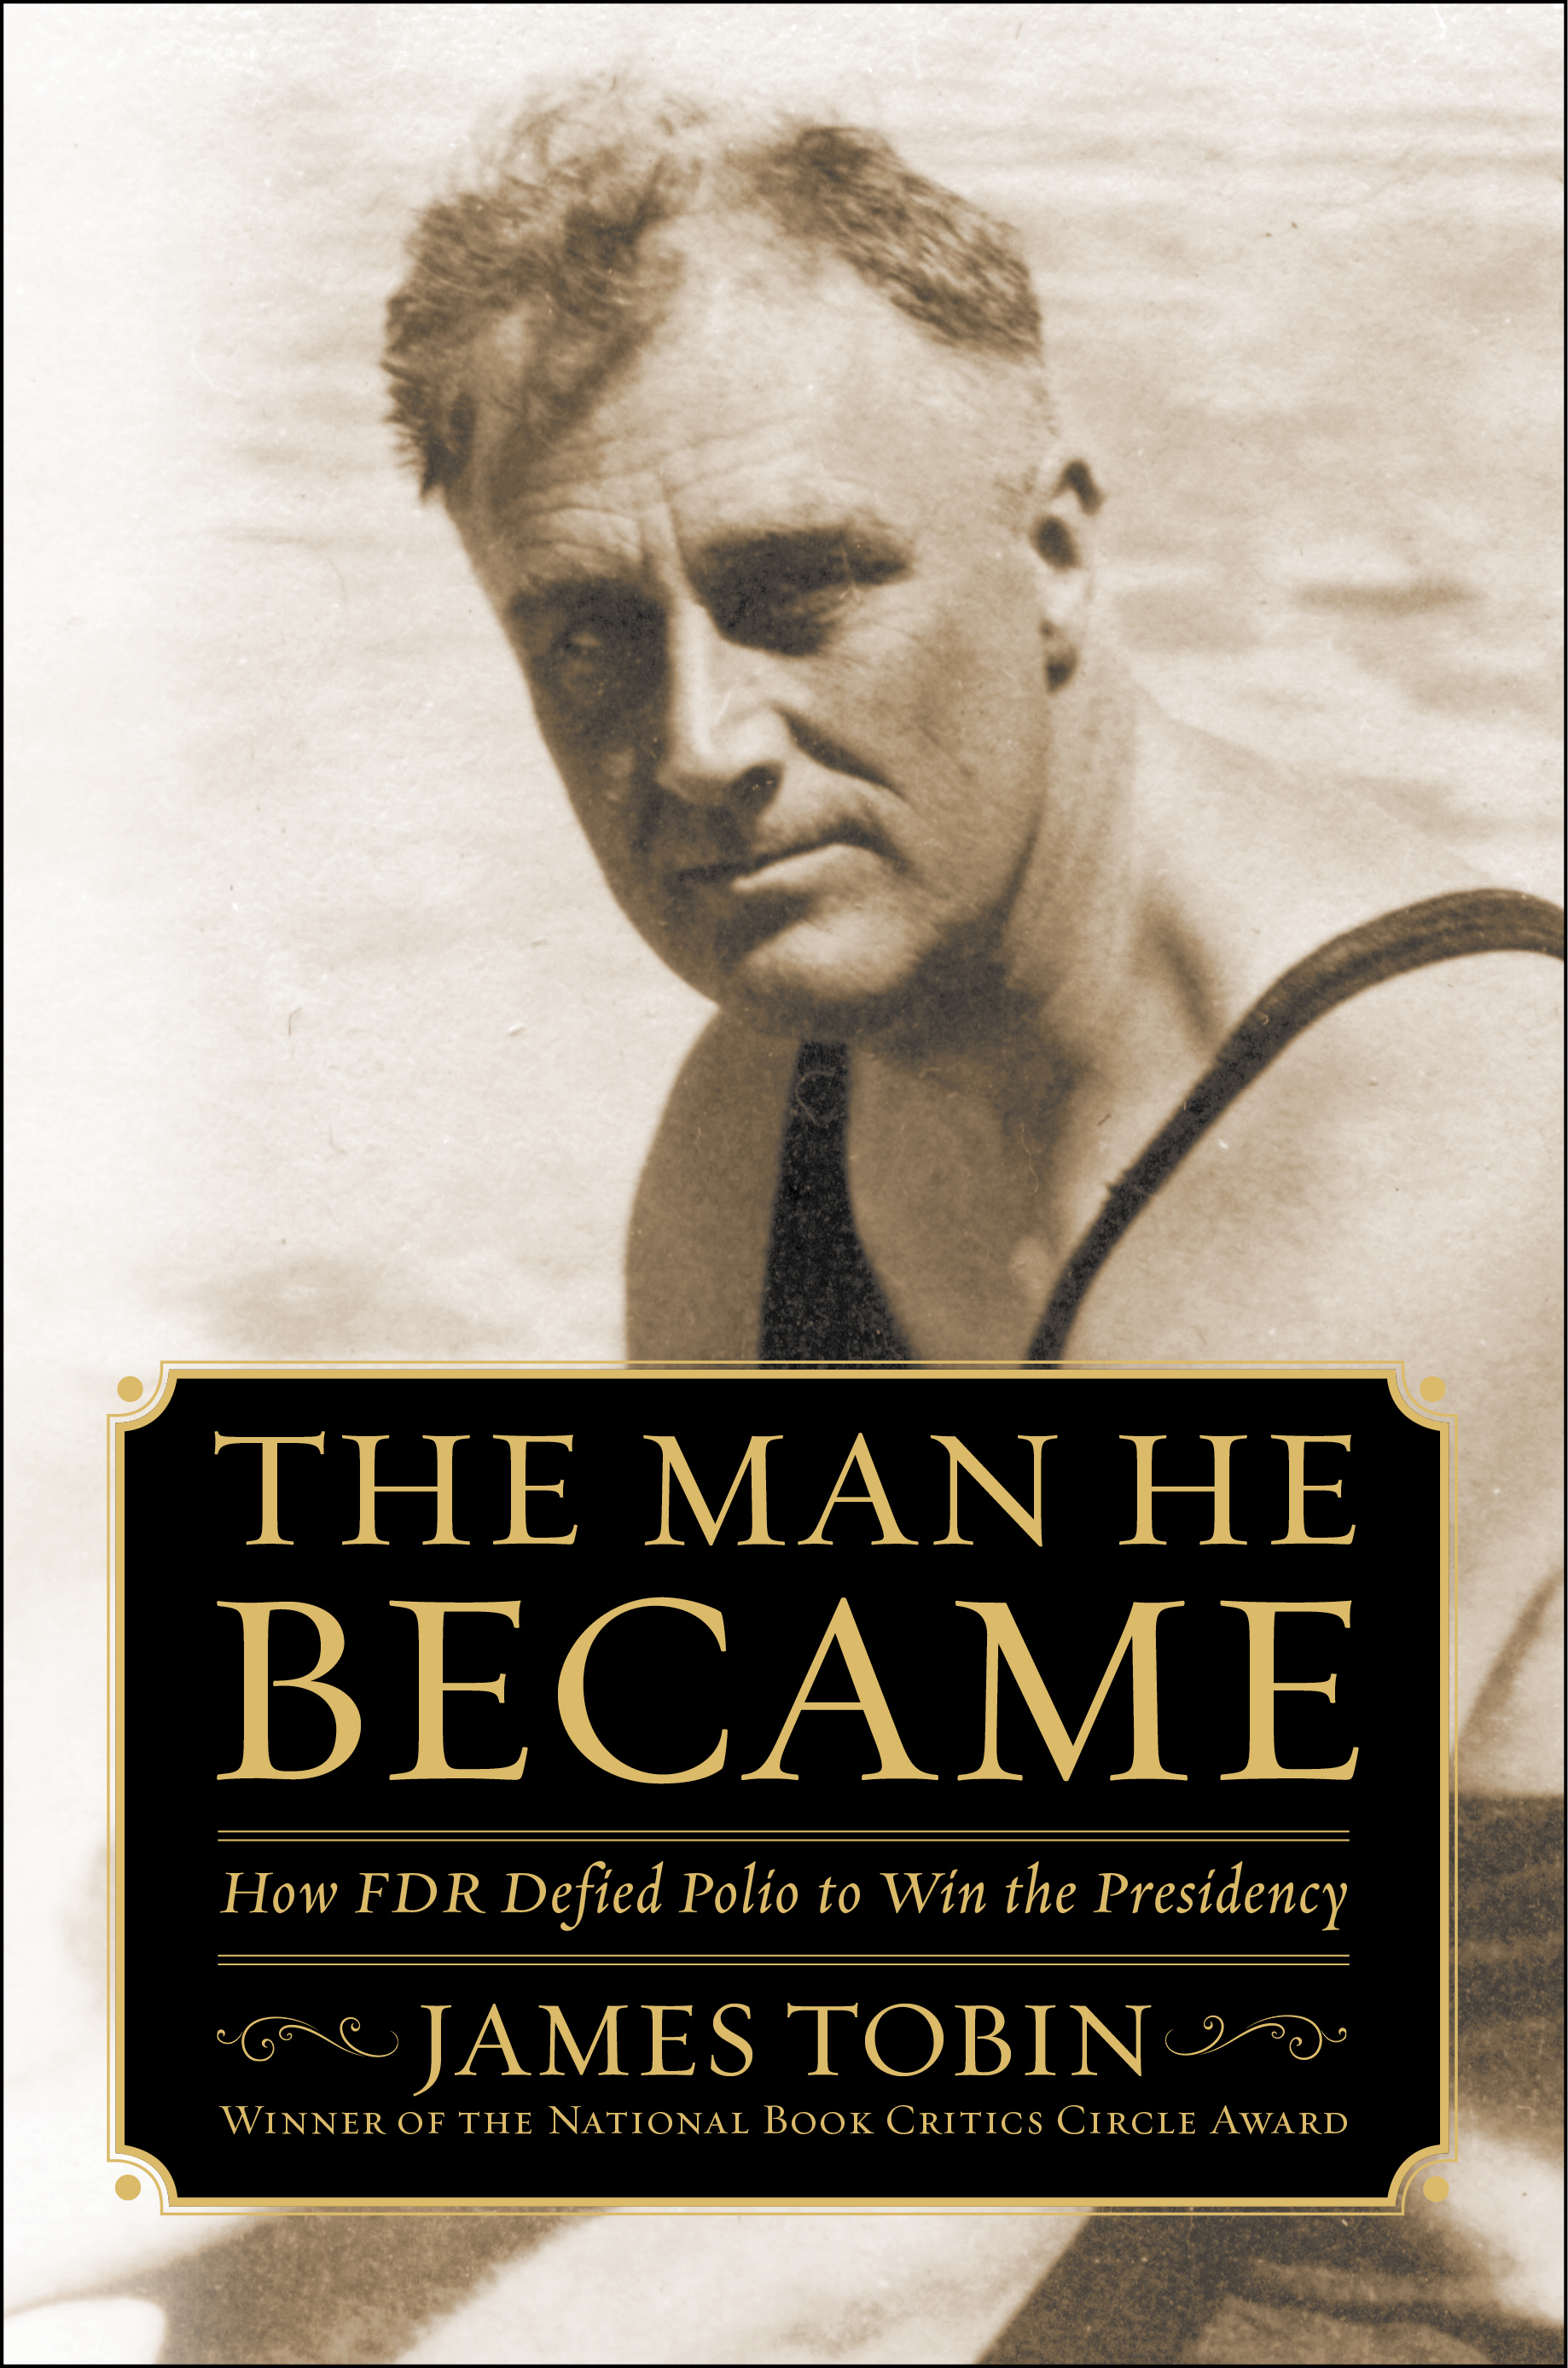 Historian James Tobin discusses his new biography of FDR on 12/4